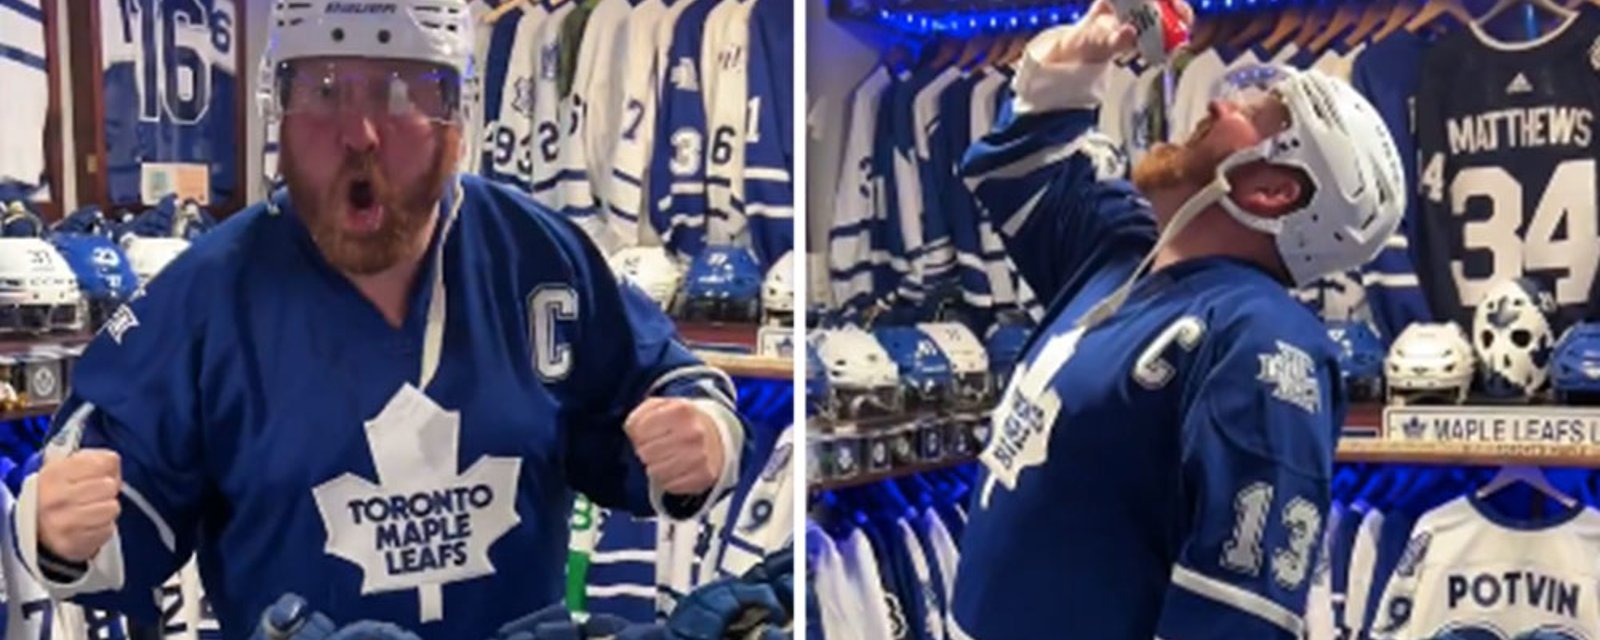 Leafs fan goes off when Knies scores, crushes beers in ultimate fan cave